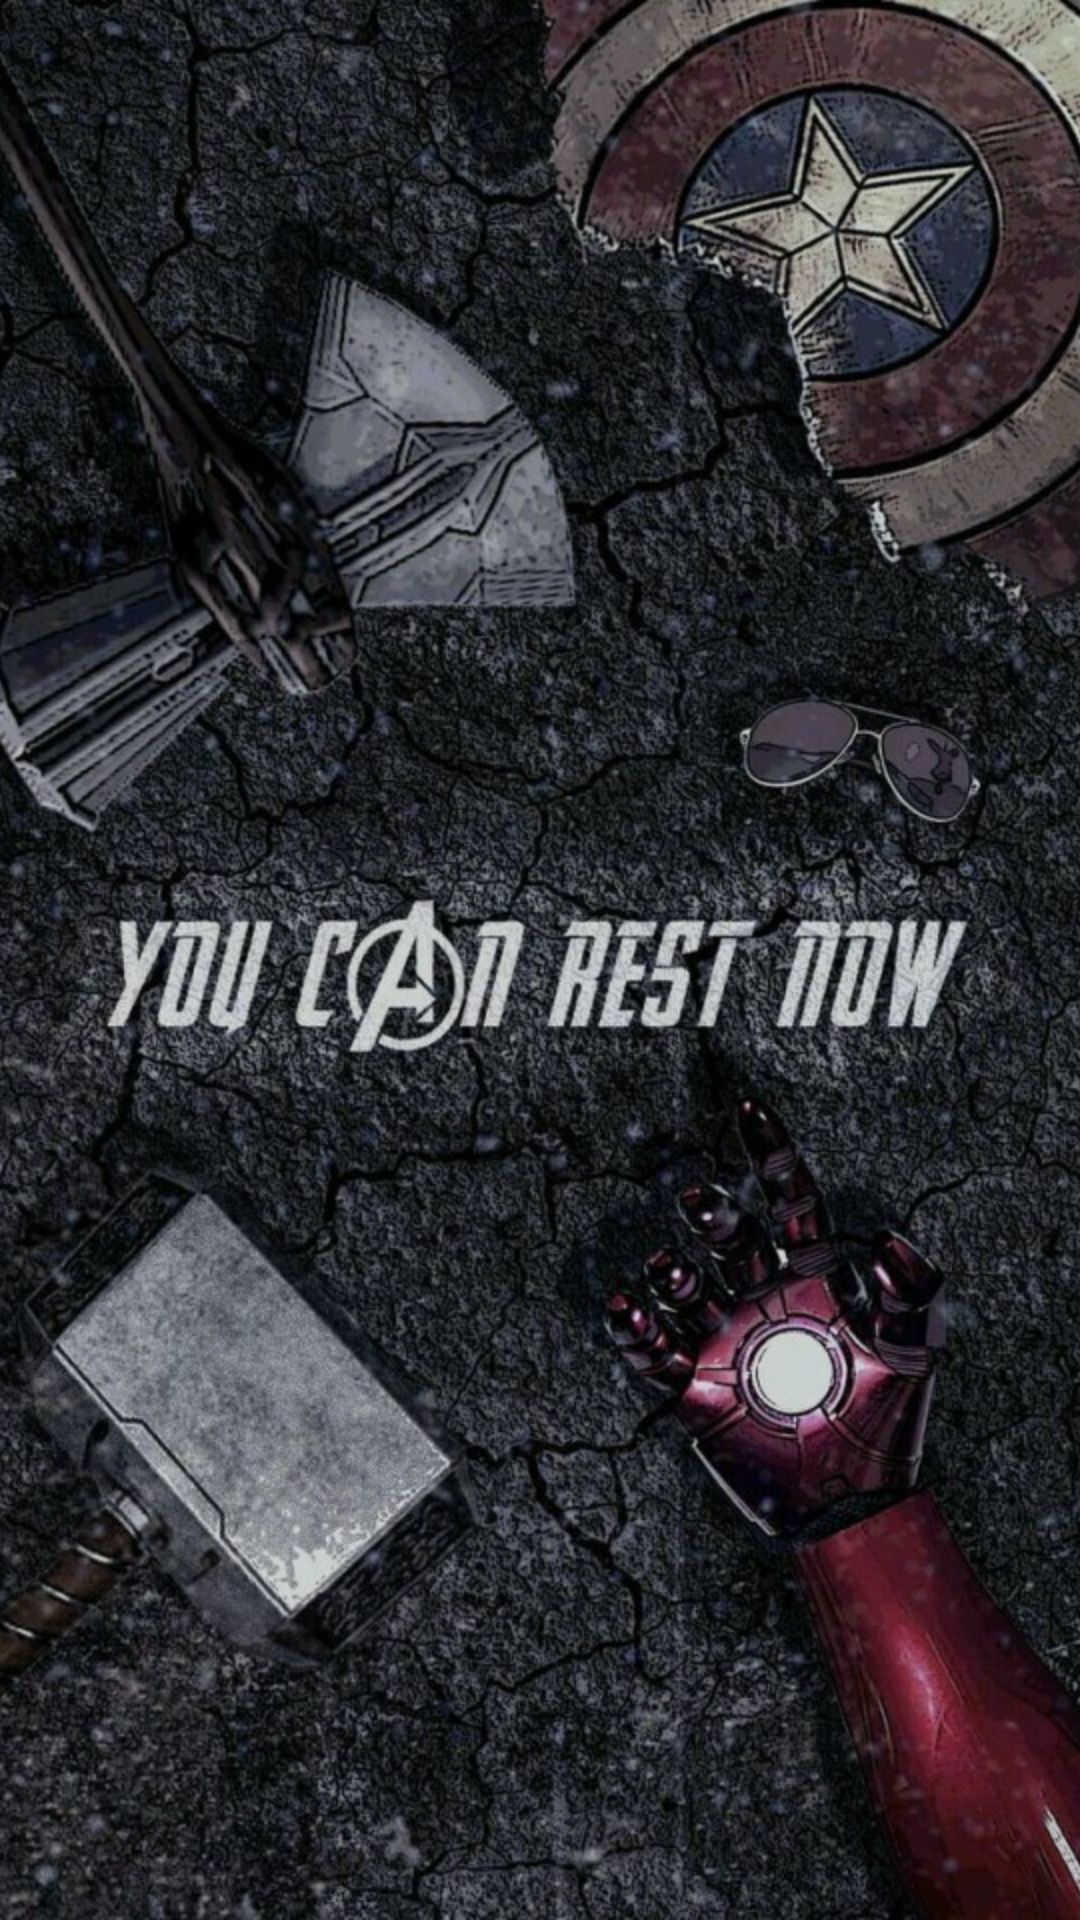 You can rest now, iPhone wallpaper, Captain America, Iron Man, Thor, phone background, iPhone home screen, Avengers - Marvel, Avengers